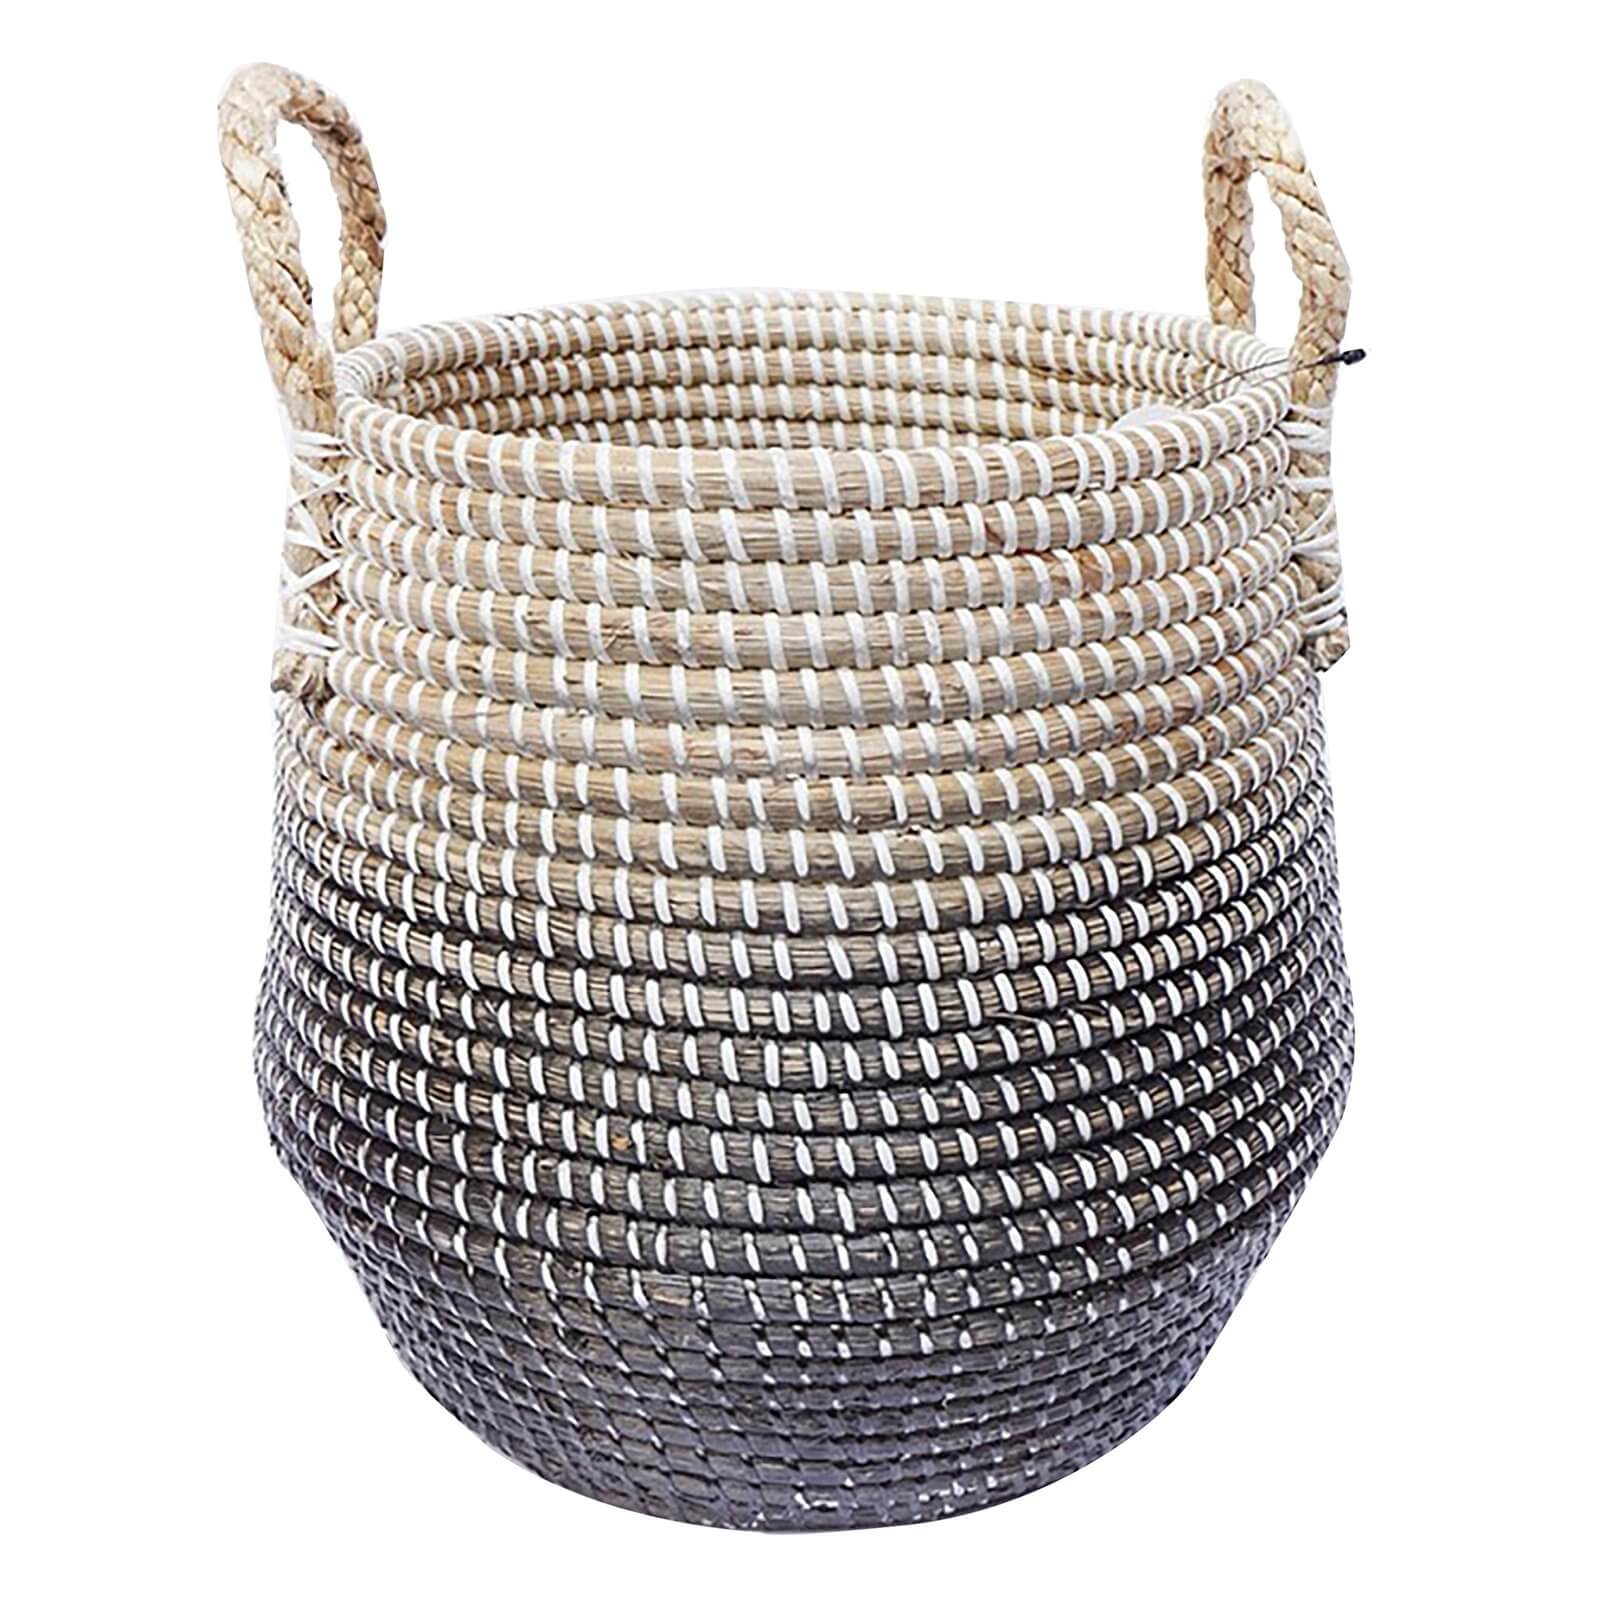 Photo of Small Seagrass Basket - Black